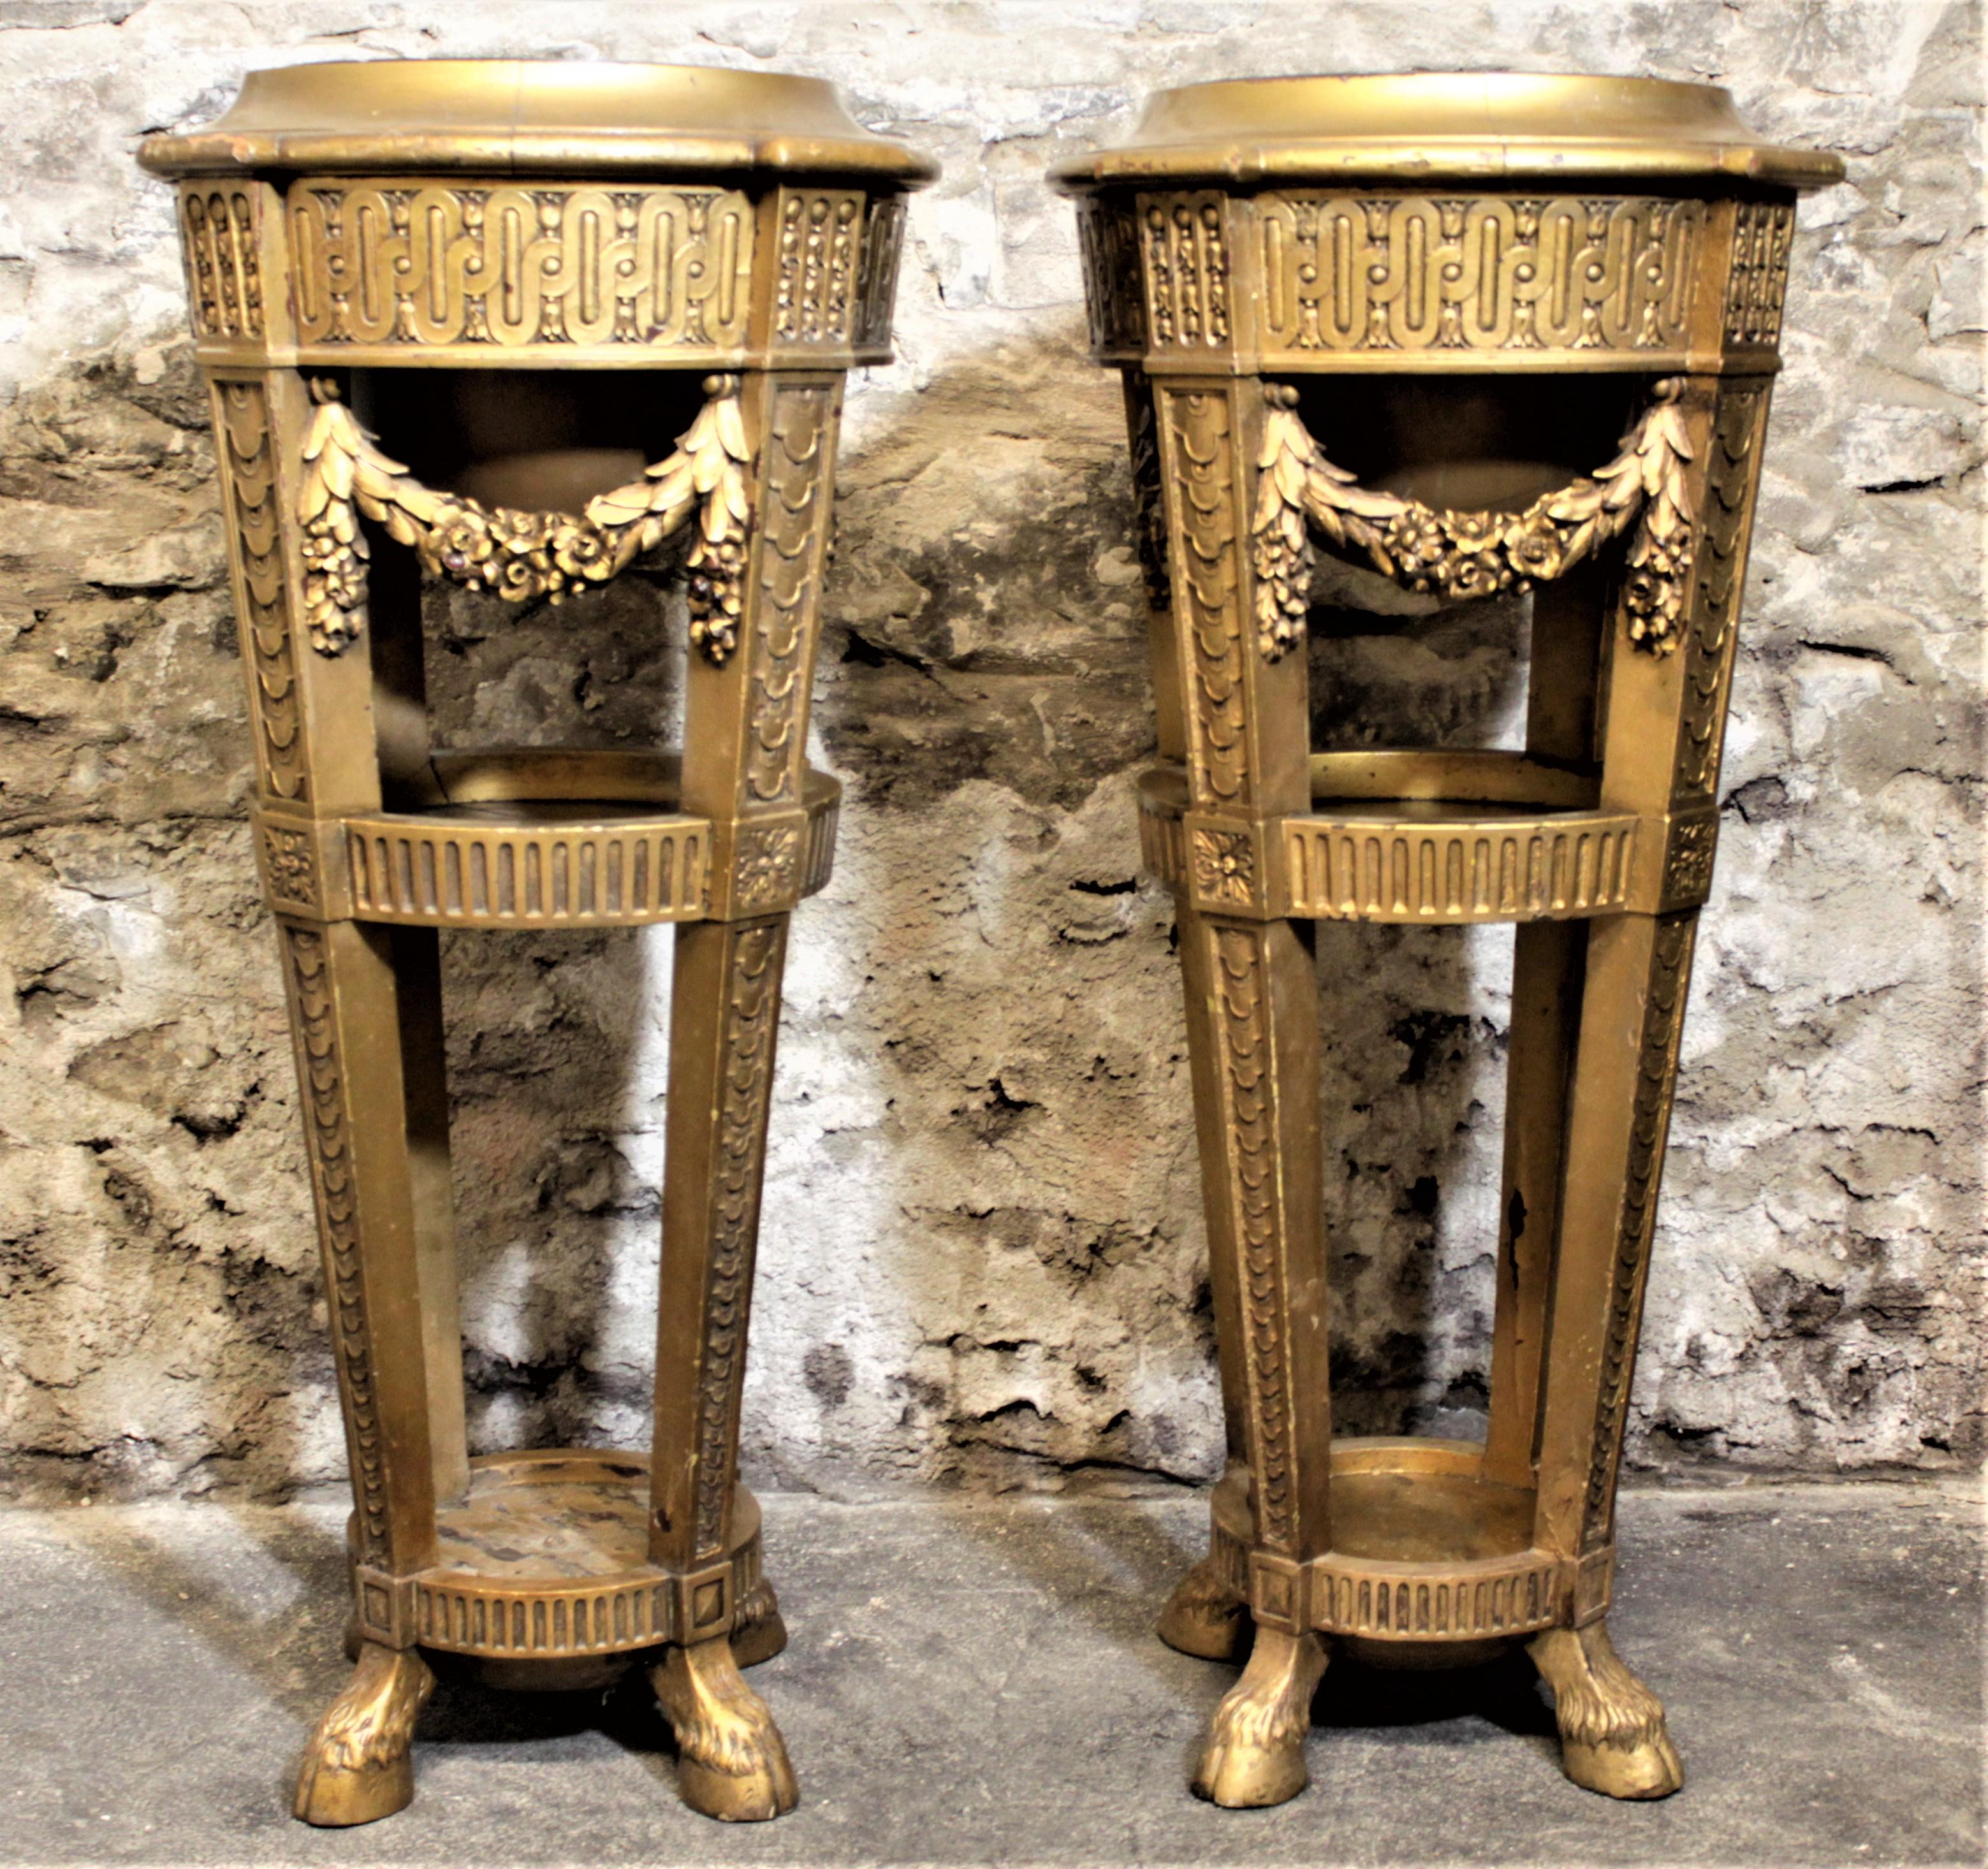 This antique pair of carved wooden plant stands or pedestals were most likely made in Europe in the Late Victorian era. The stands are composed of a sturdy softwood that has been intricately carved, featuring geometric designs on the legs, accented